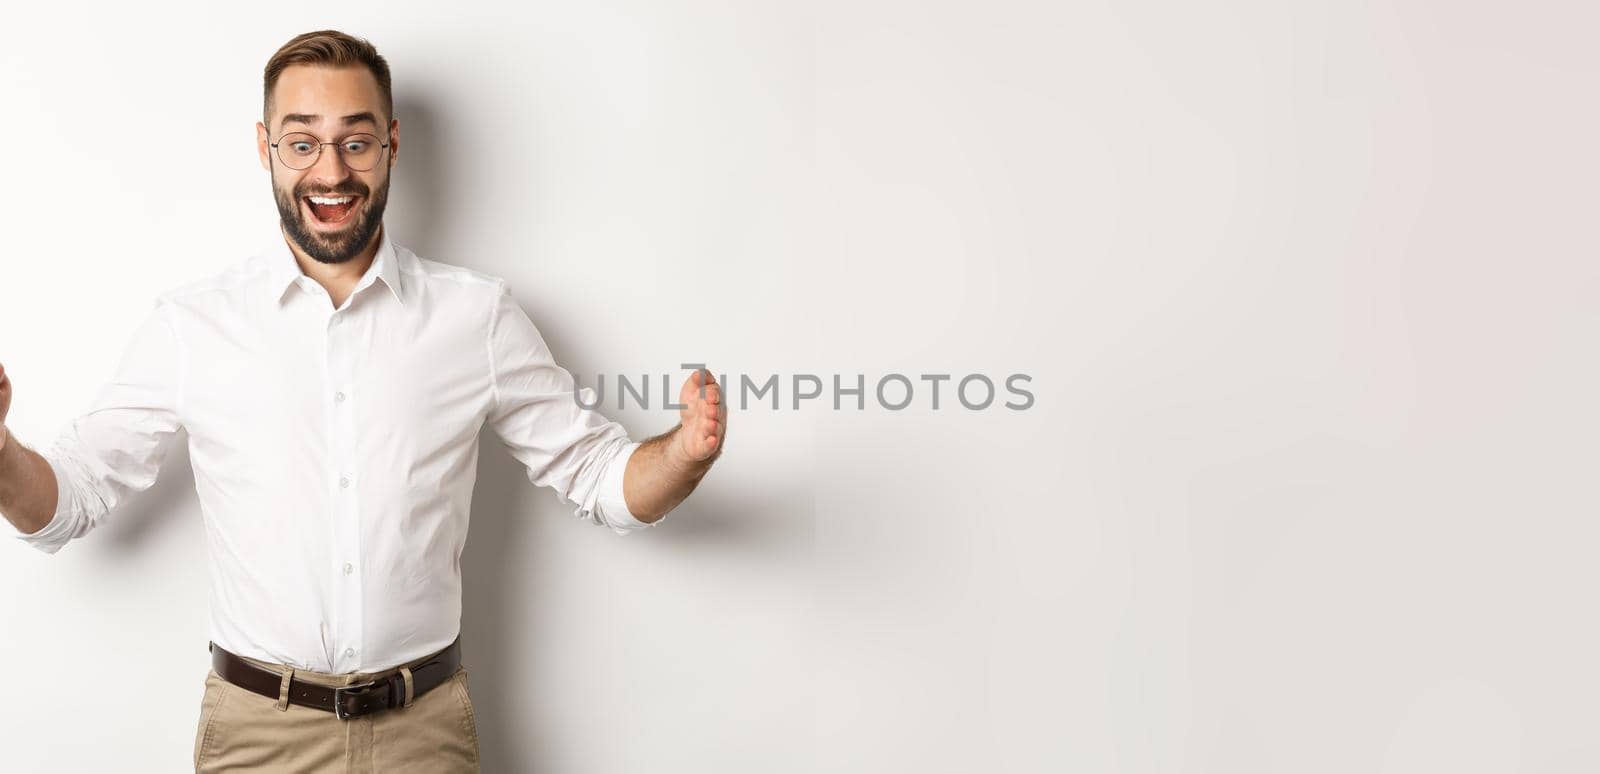 Amazed businessman showing big object, describe something large and looking excited, standing over white background.